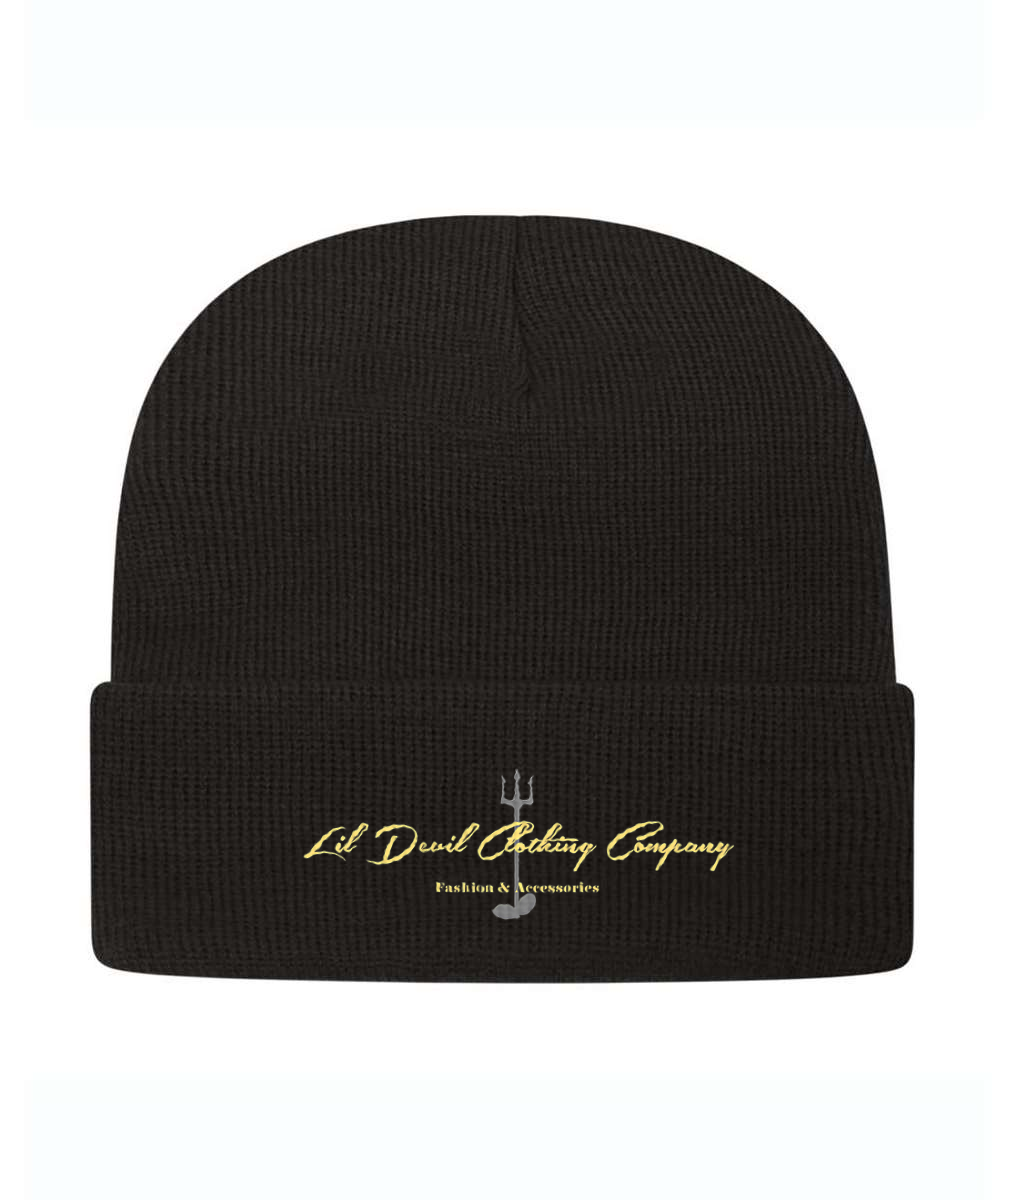 Embroidered  TKN24 Knit Beanie or SimilarLDCC24